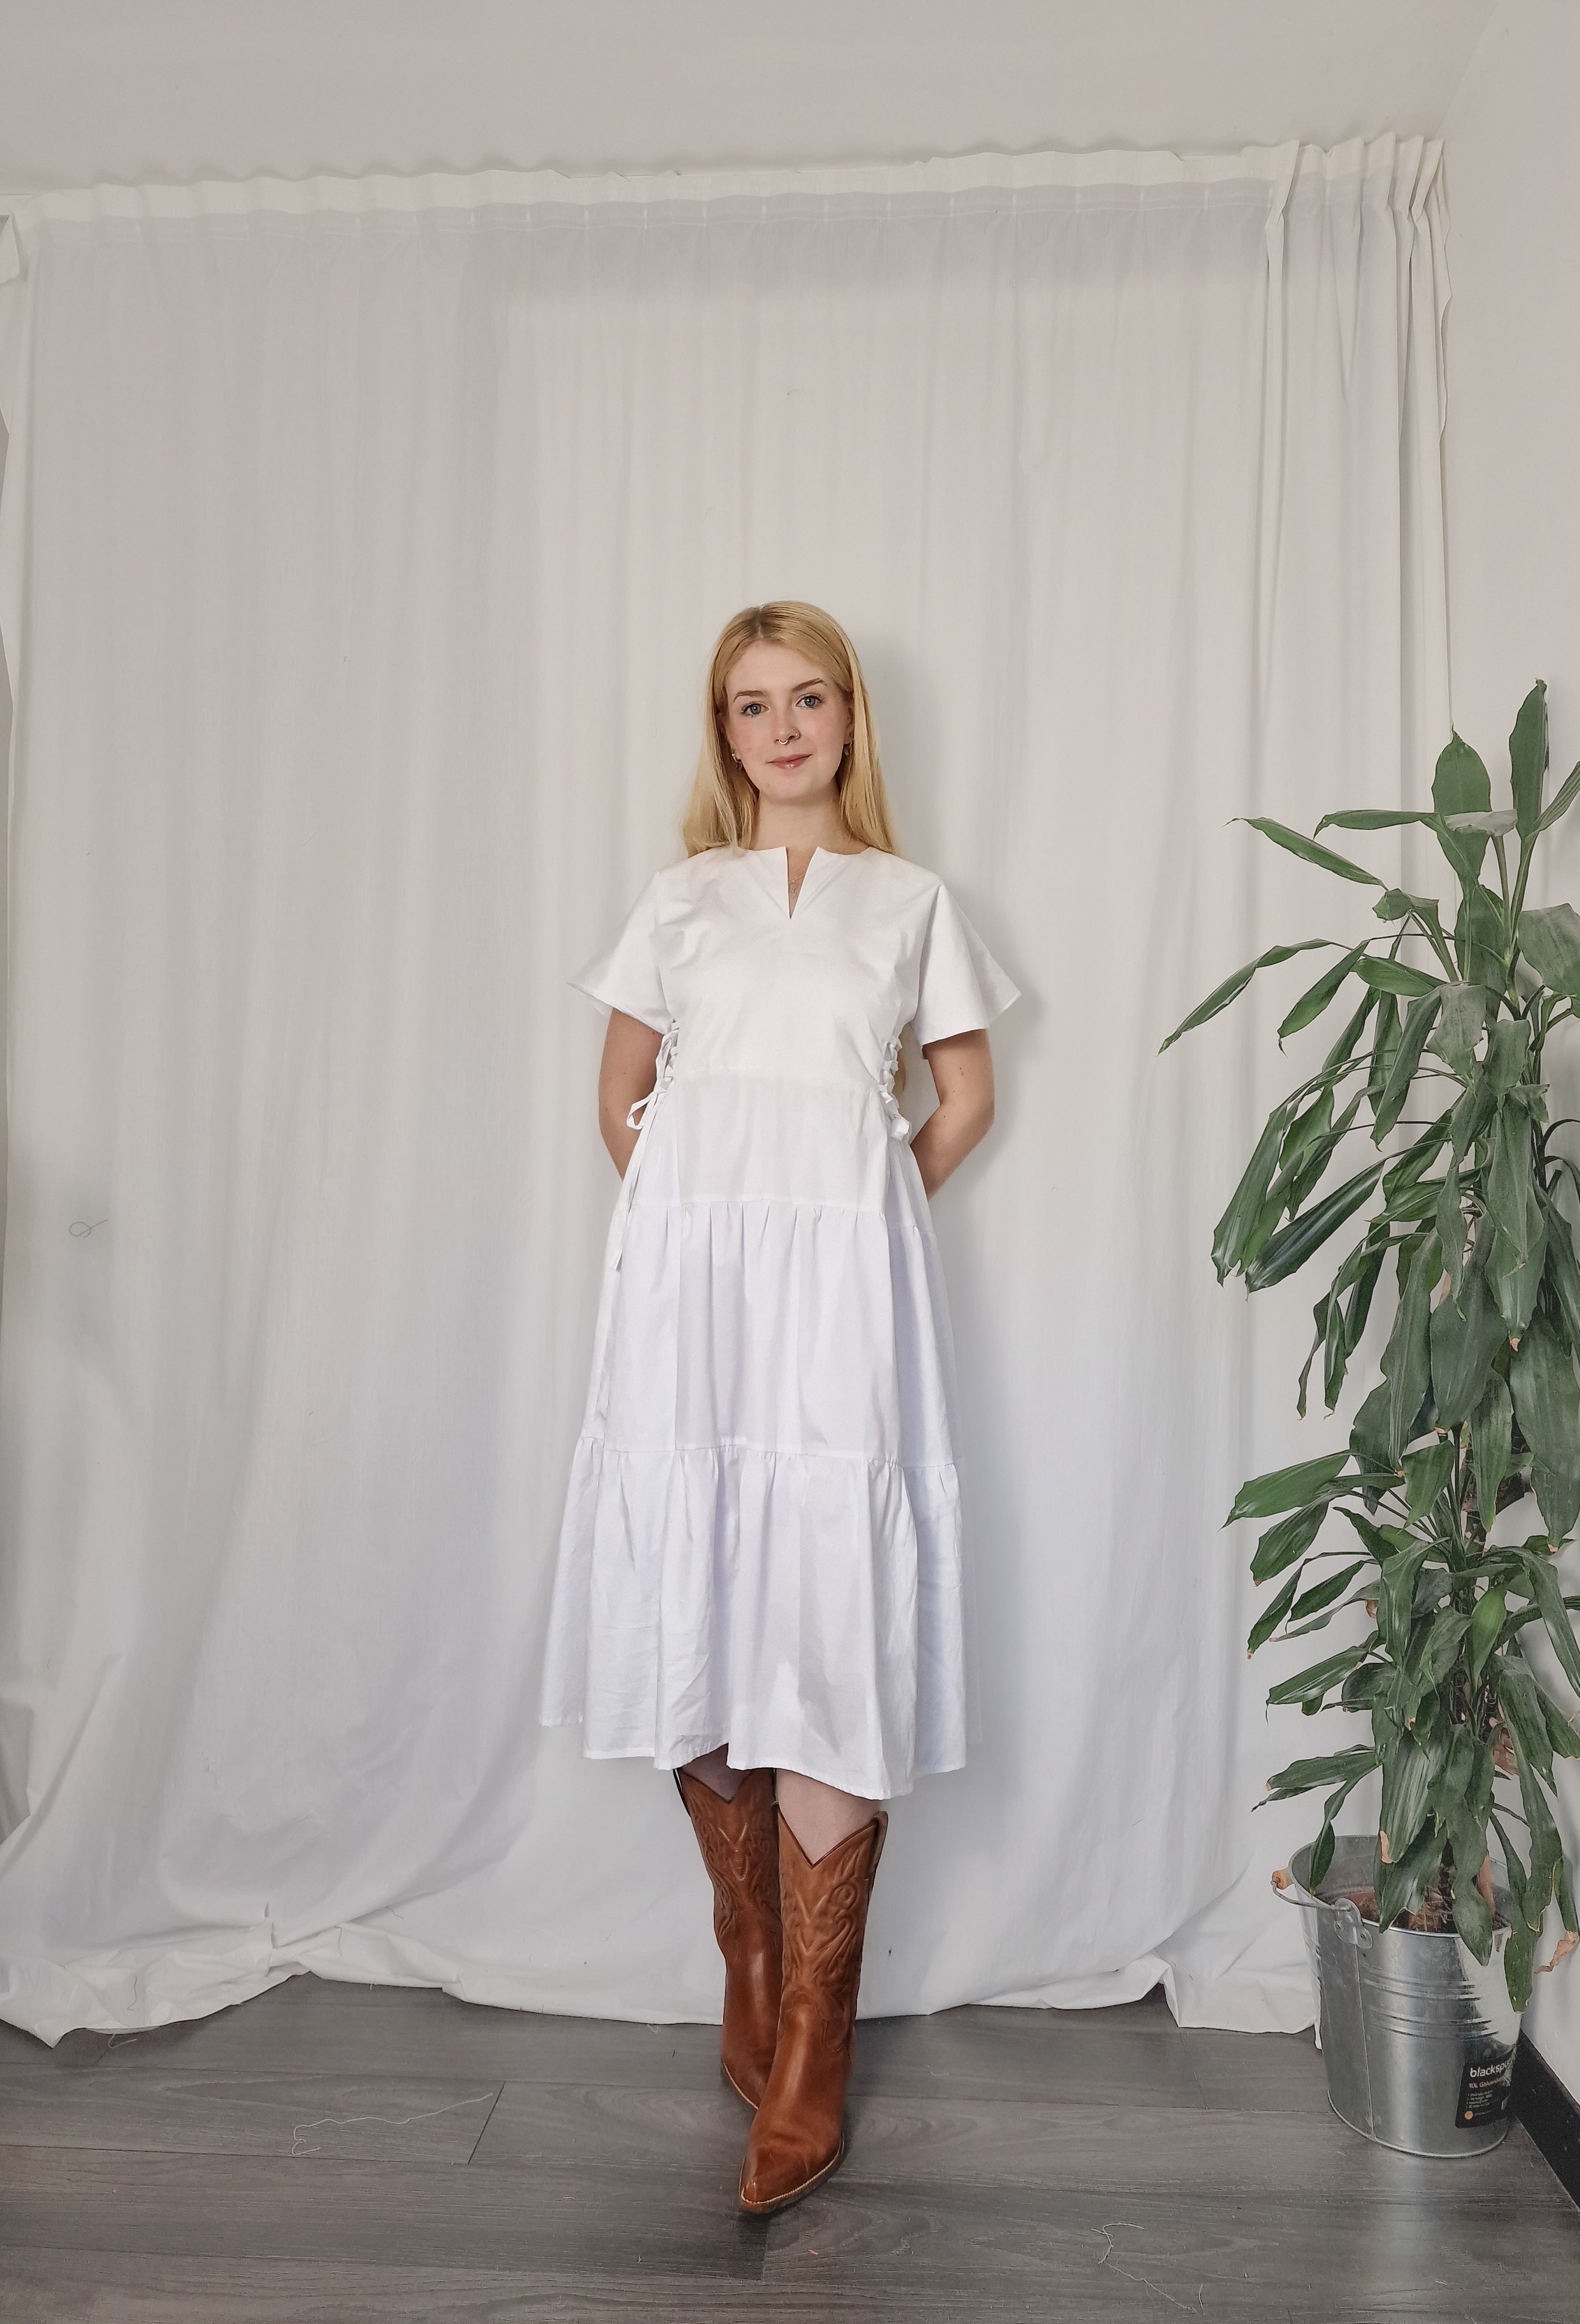 Dreaming Of Ivy - Handmade sustainable fashion